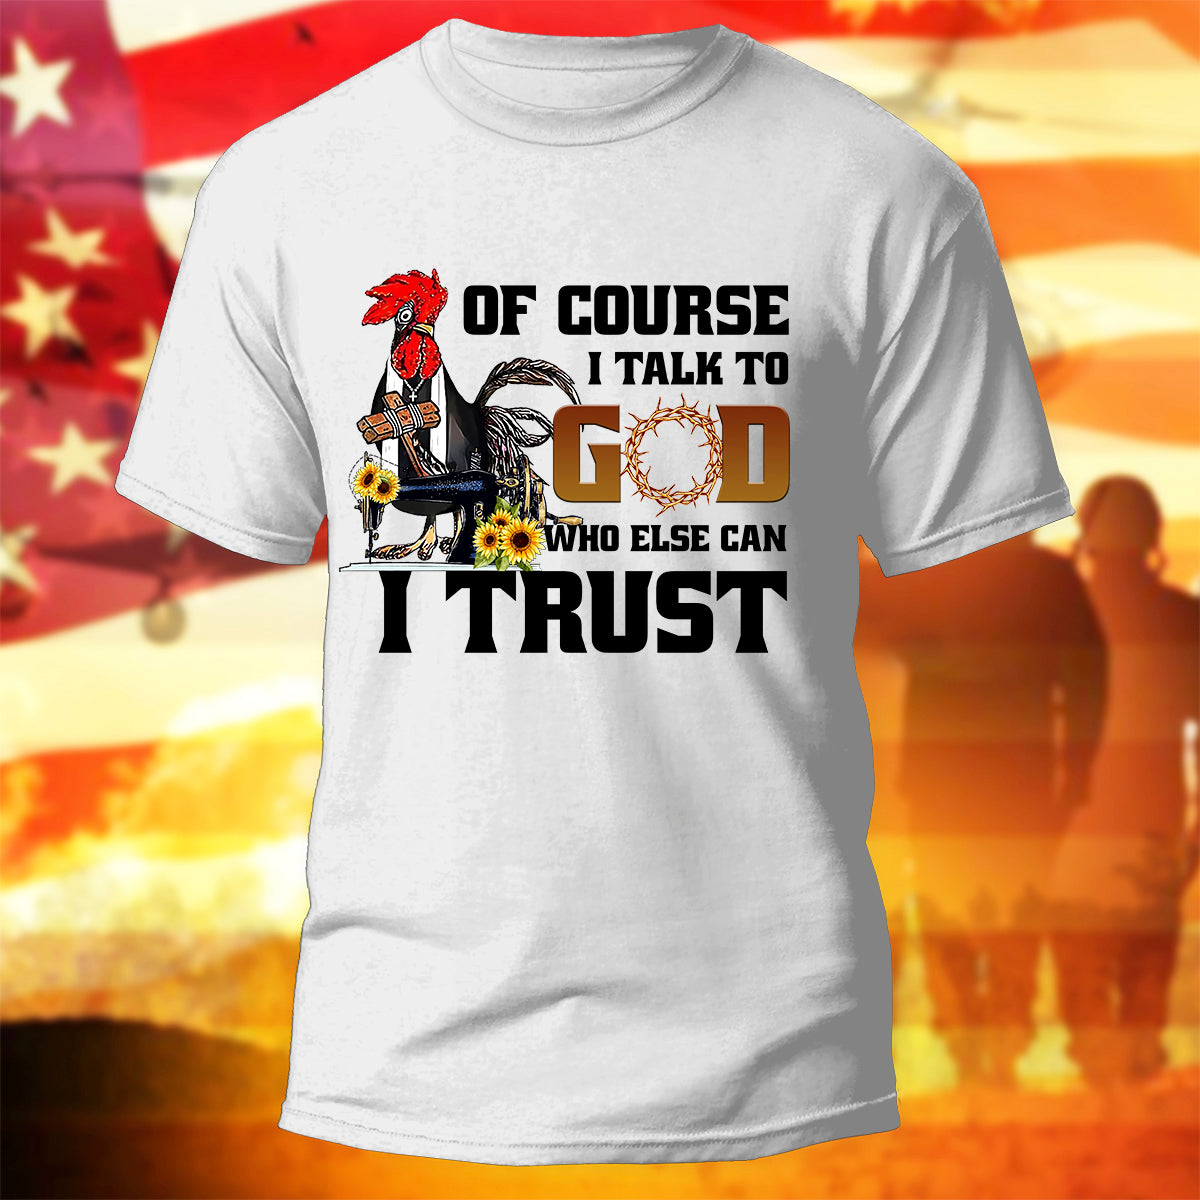 Funny Chicken T-Shirt Of Course I Talk To God Who Else Can I Trust Shirt Christian Gift